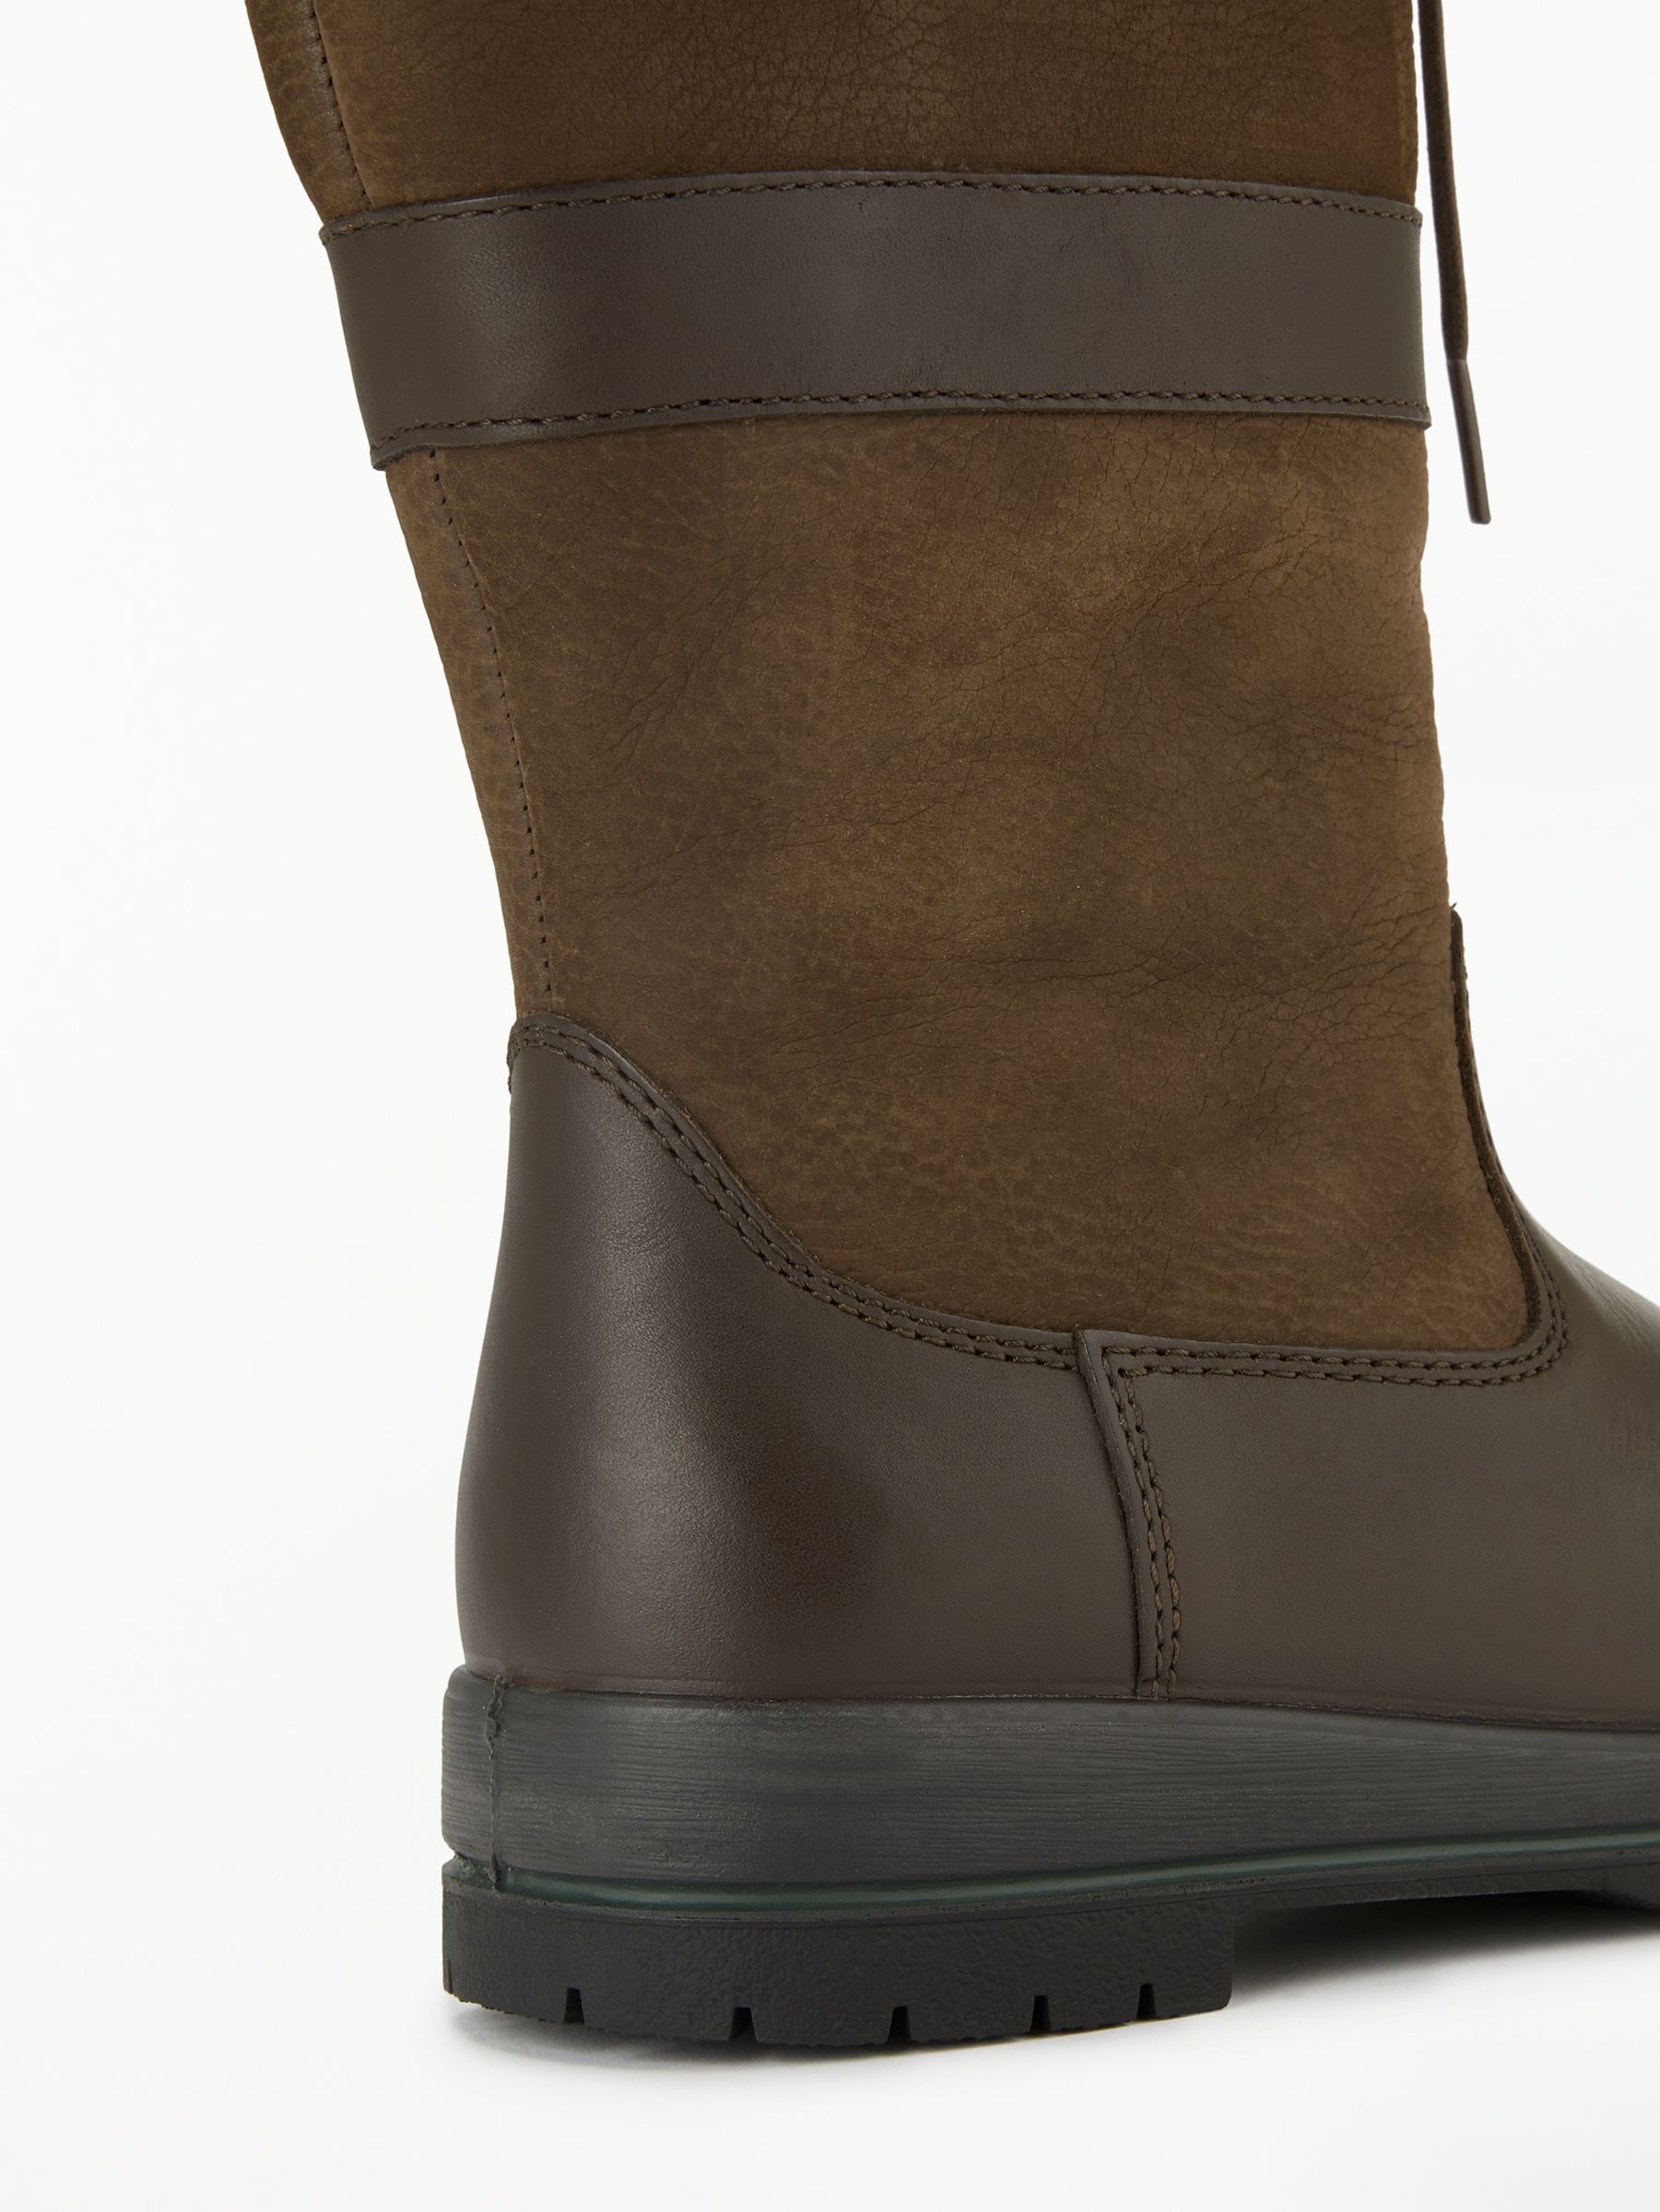 Dubarry Galway Gortex Waterproof Knee High Boots, Walnut Leather at ...